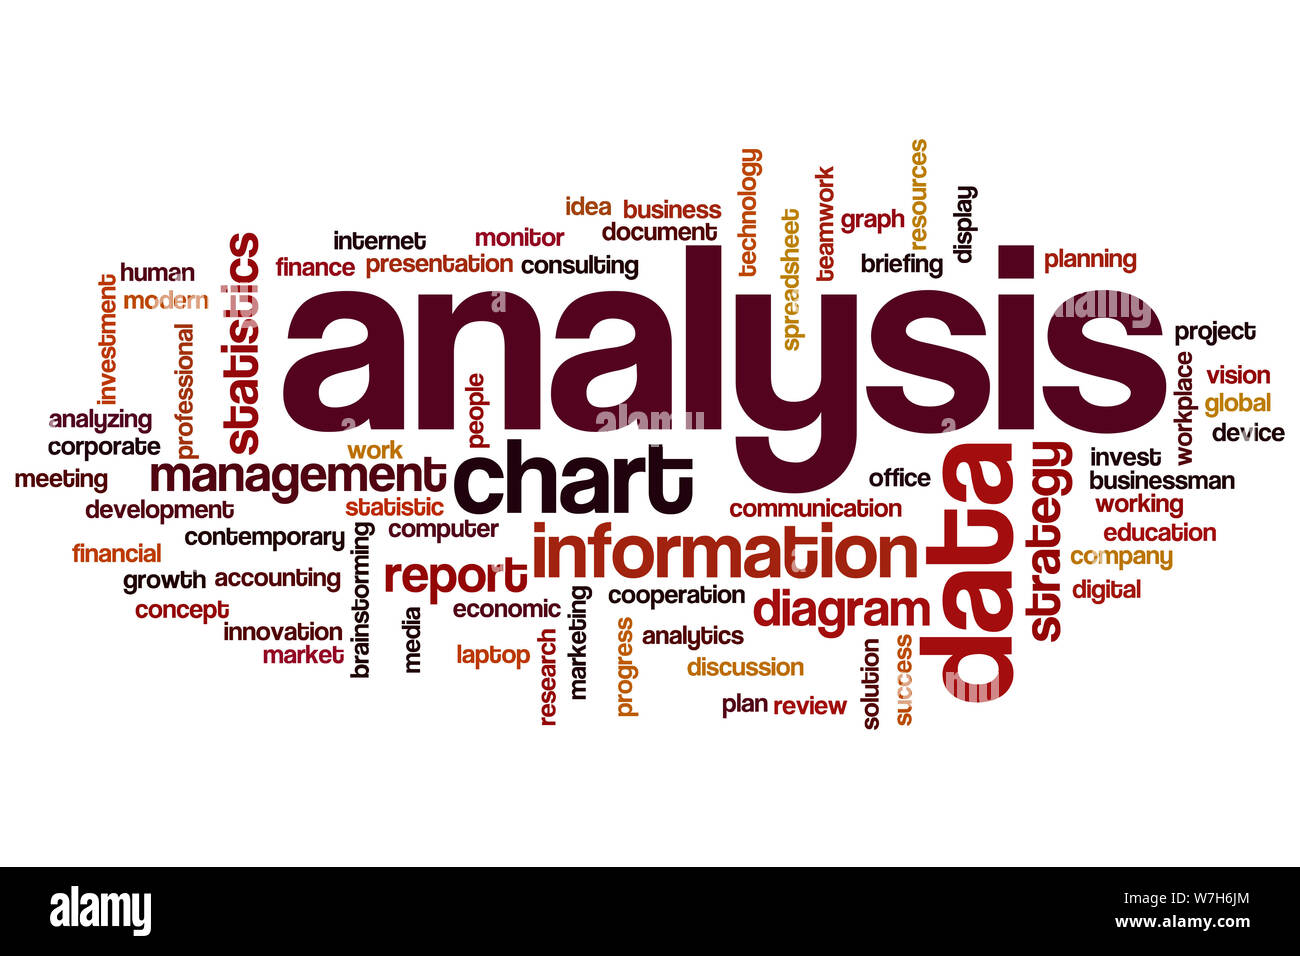 Analyse Word Showing Analytics Analysis Or Analyzing Stock Photo, Picture  and Royalty Free Image. Image 22702234.